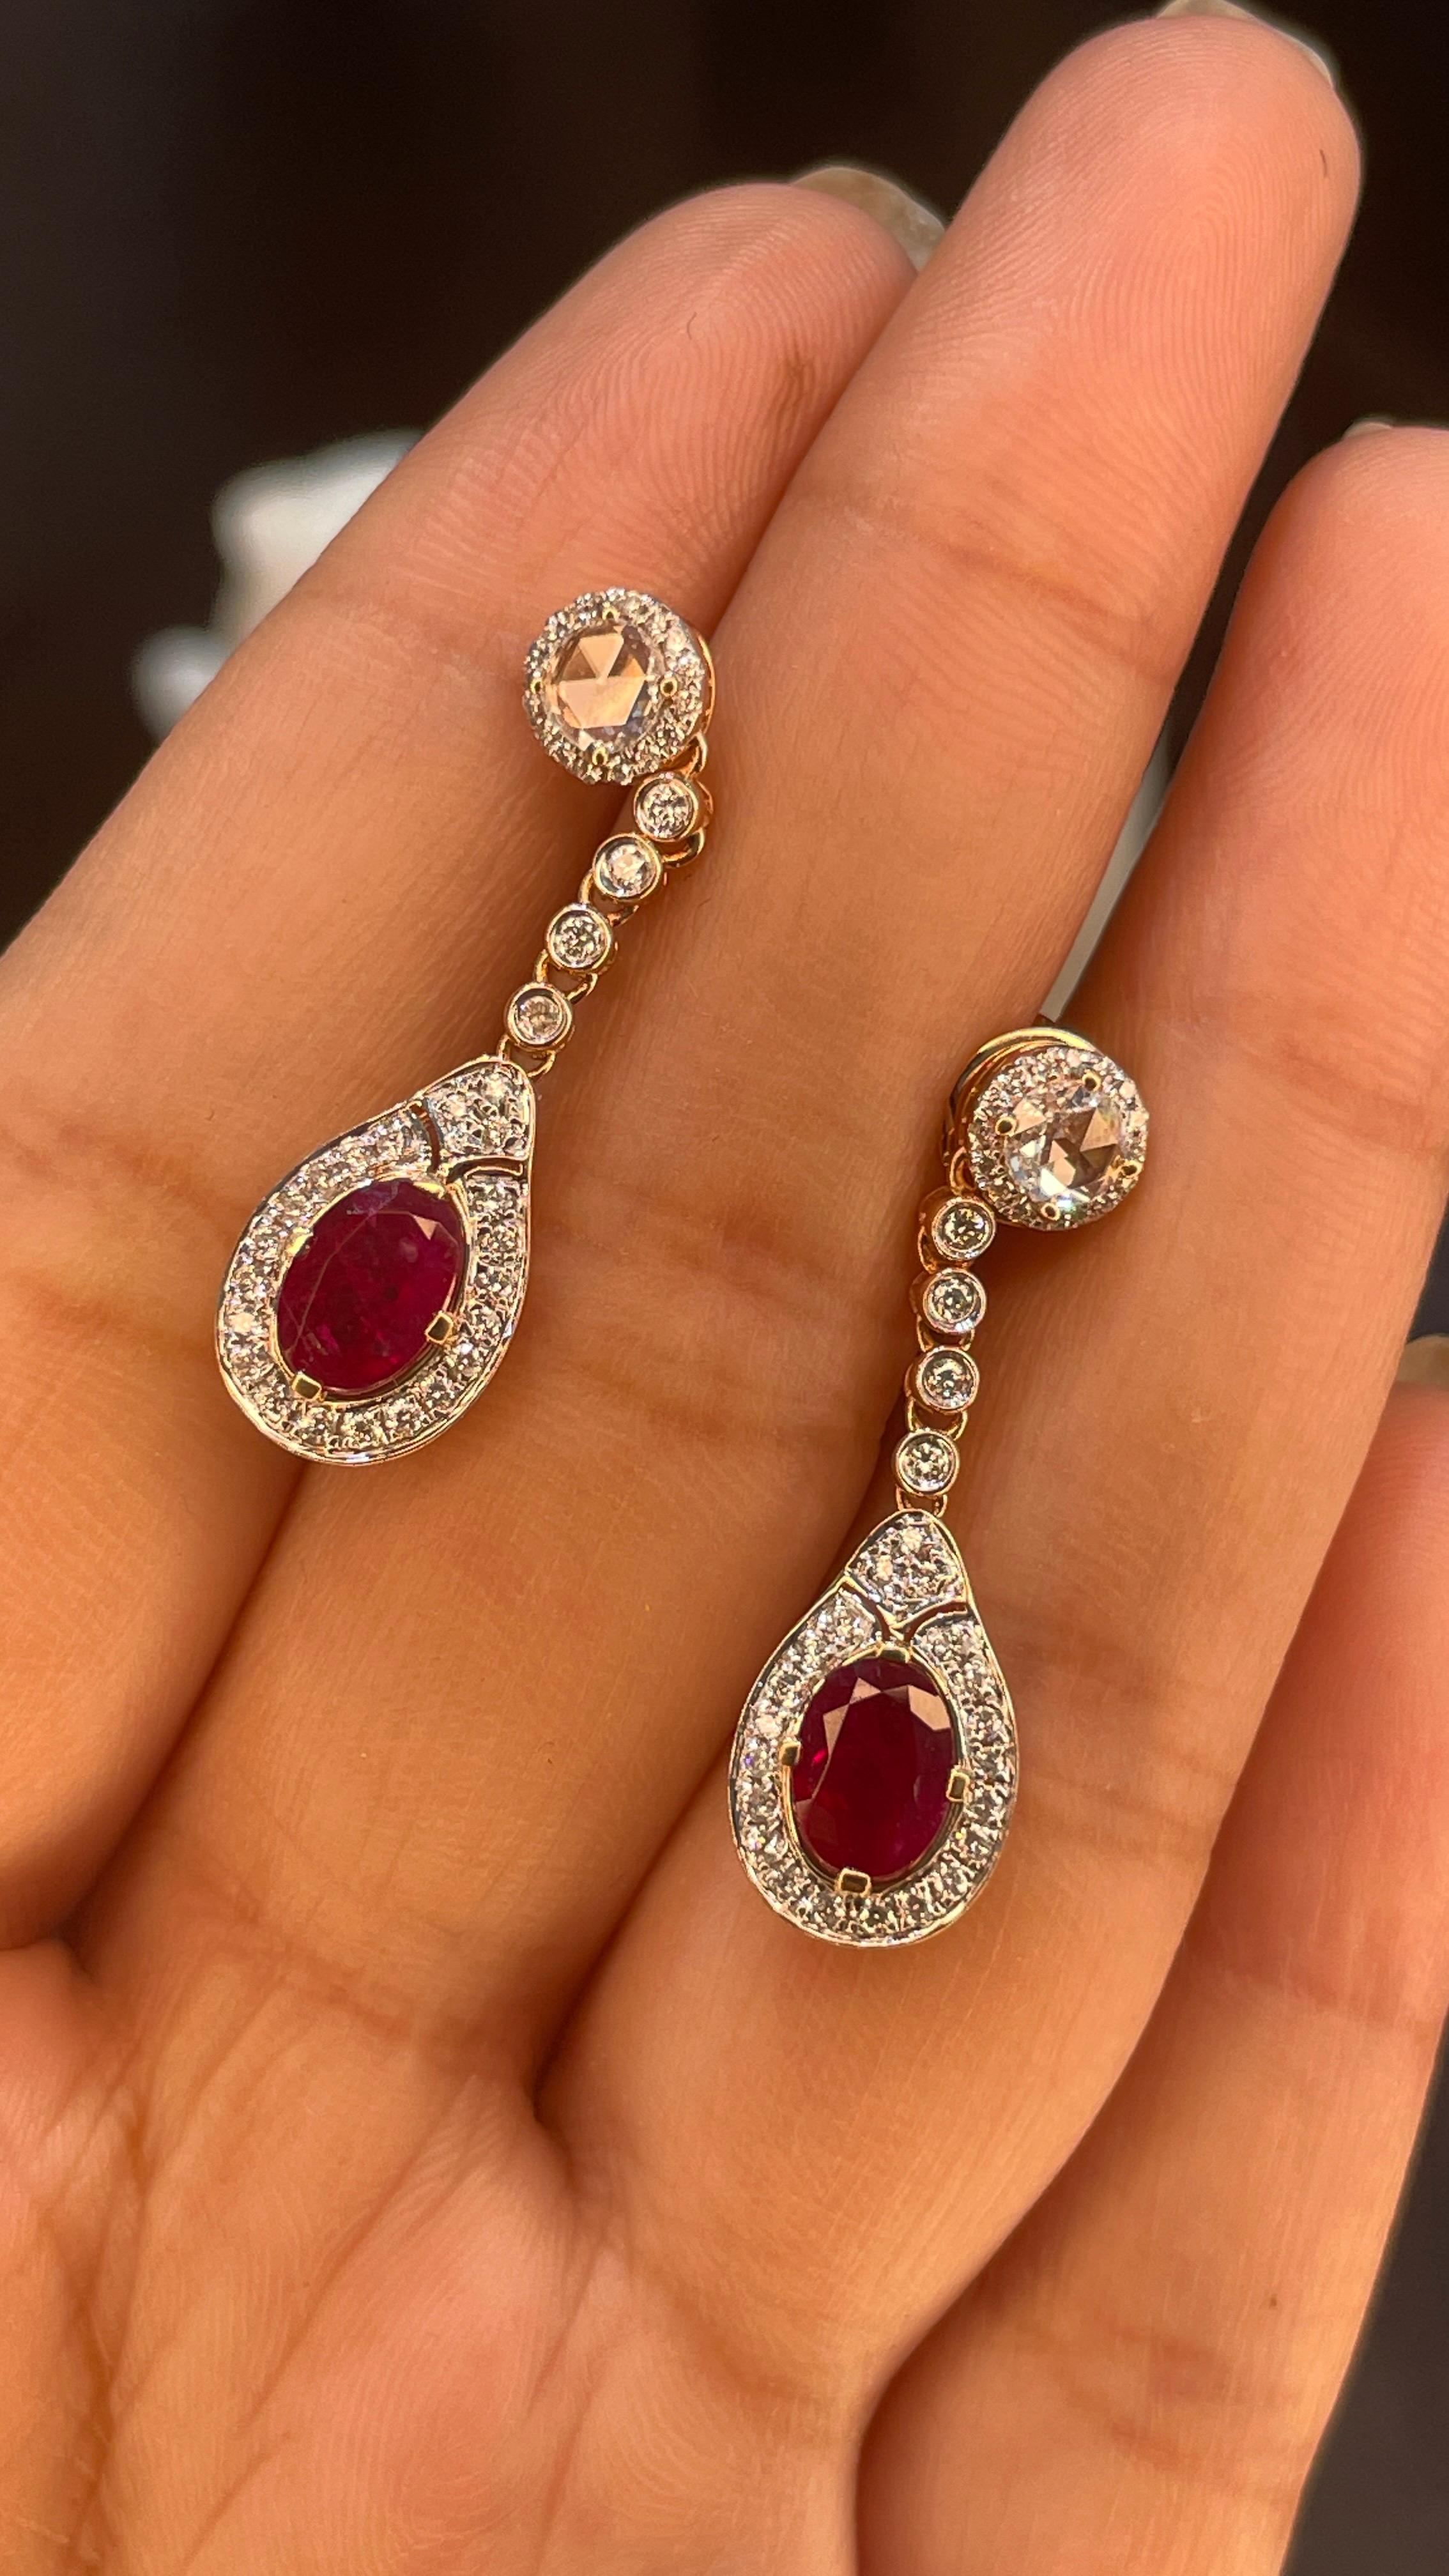 Ruby Dangle earrings to make a statement with your look. These earrings create a sparkling, luxurious look featuring oval cut gemstone.
If you love to gravitate towards unique styles, this piece of jewelry is perfect for you.

PRODUCT DETAILS :-

>